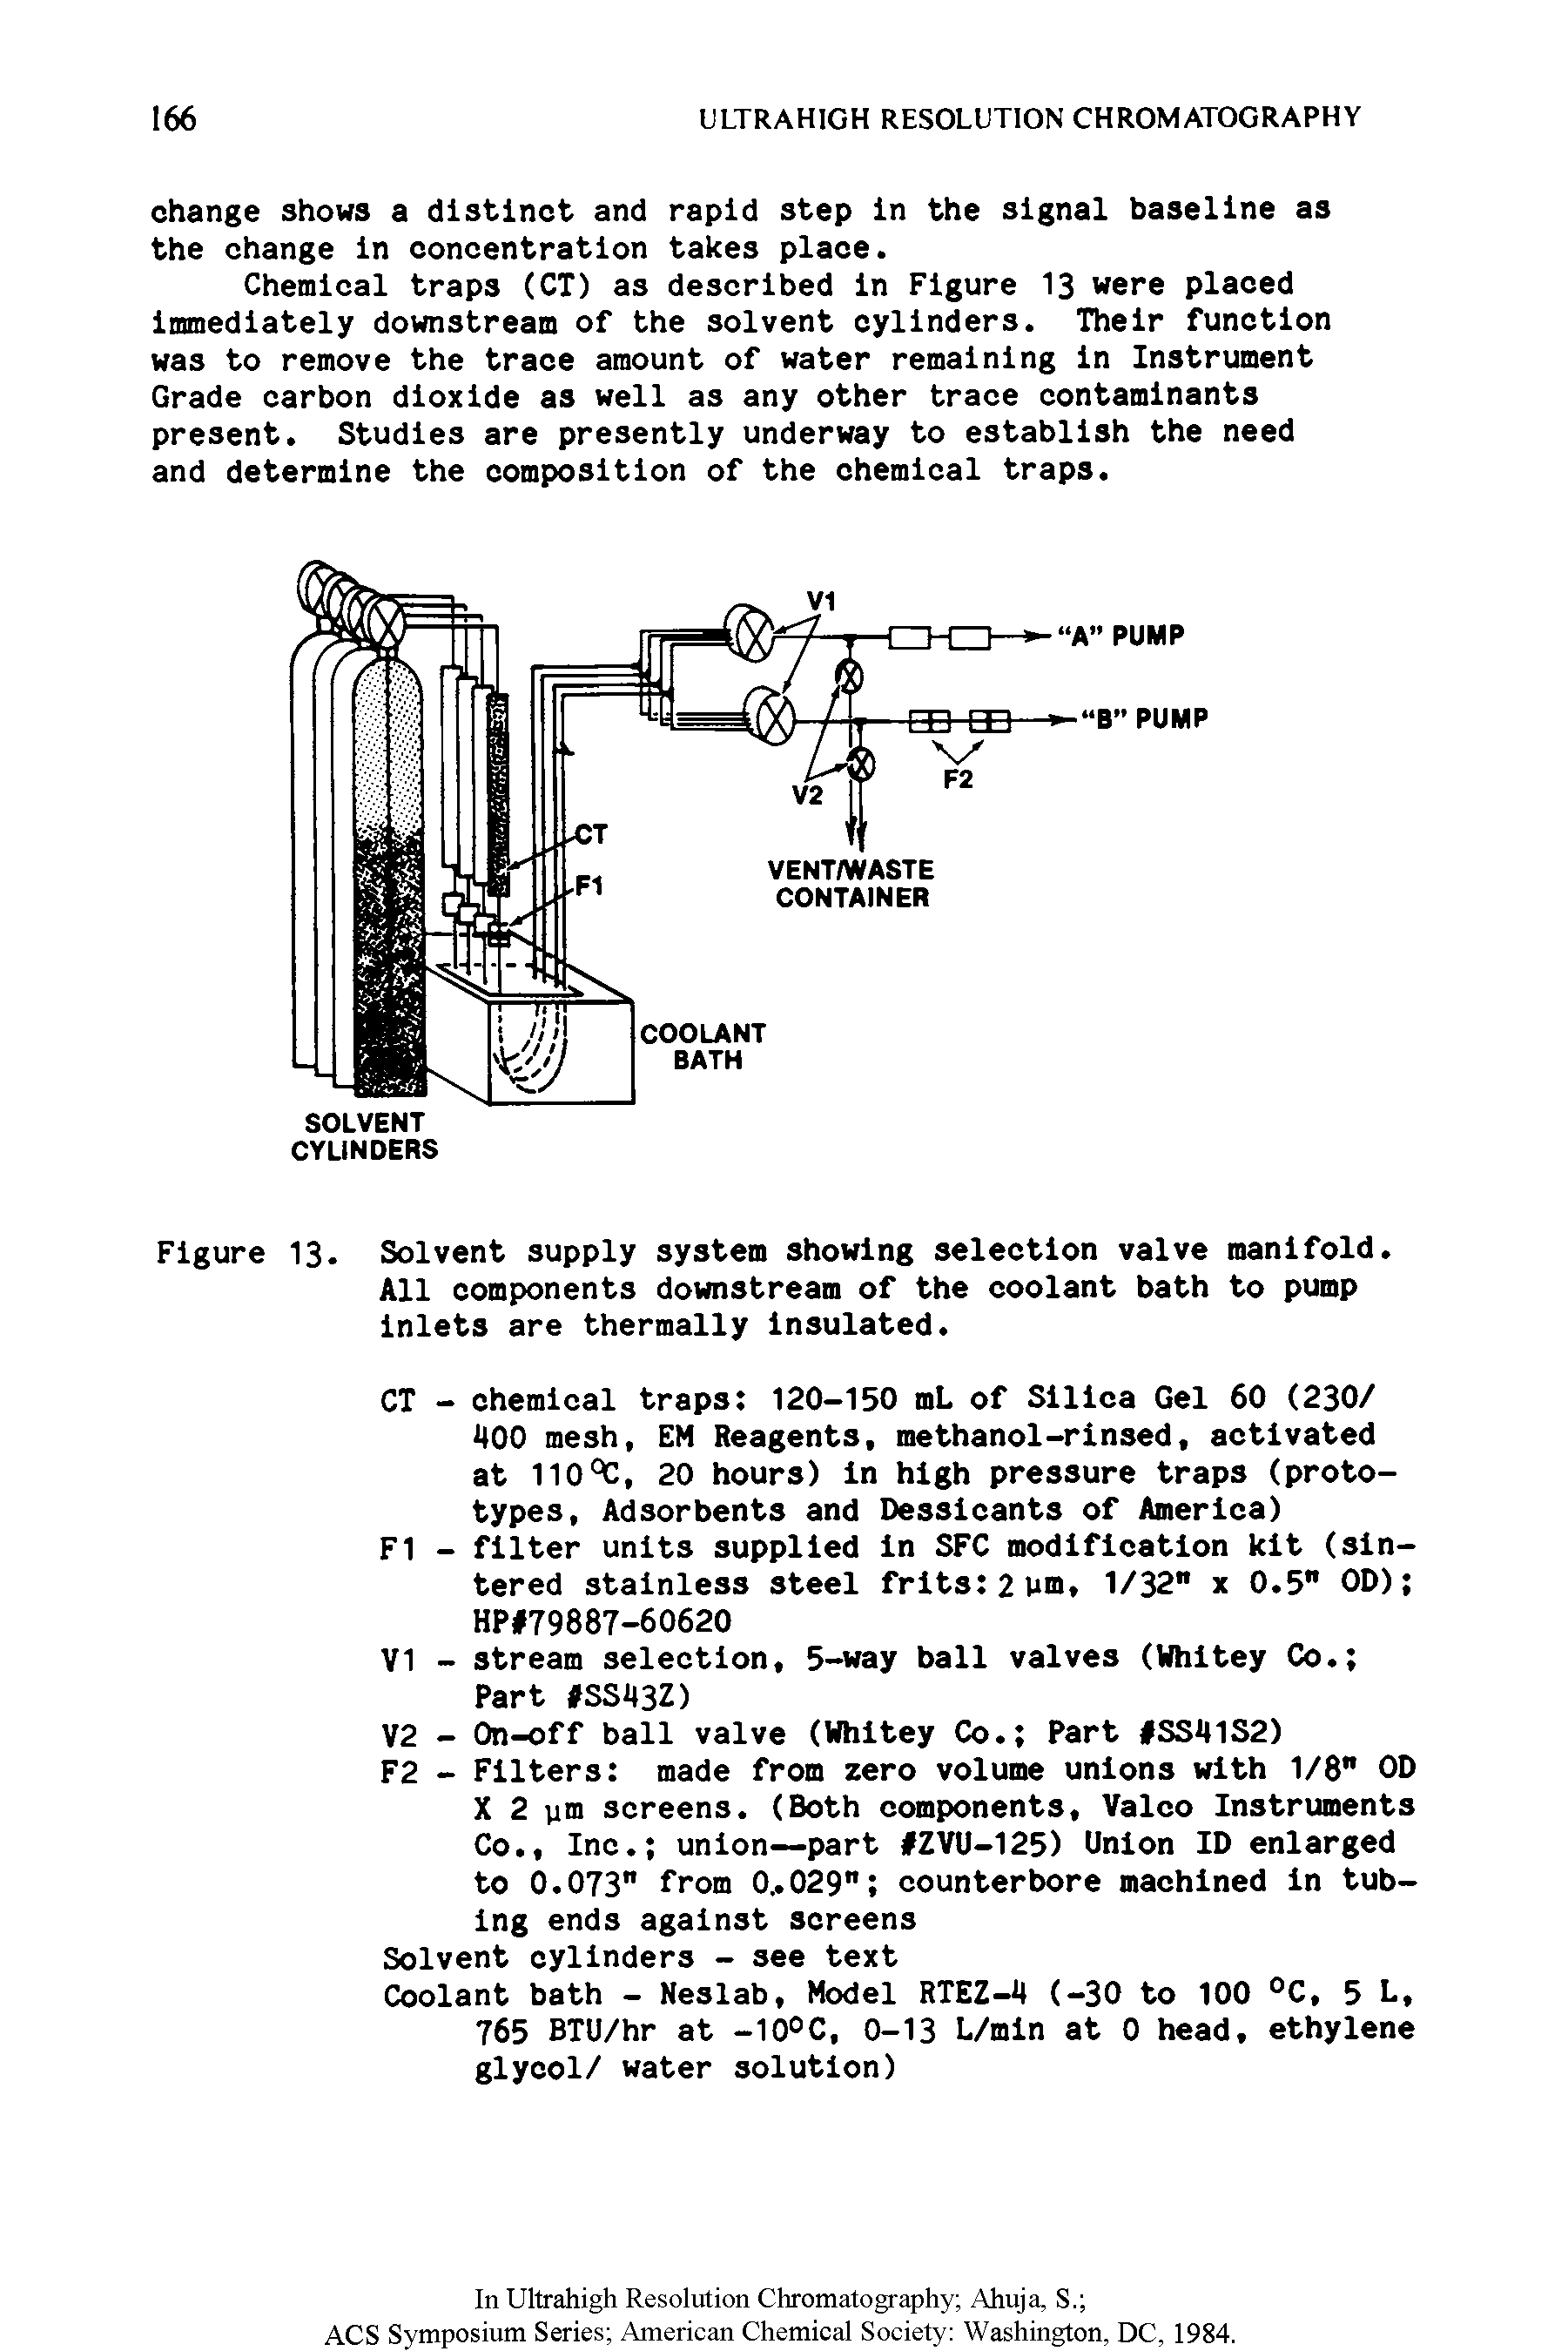 Figure 13. Solvent supply system showing selection valve manifold.